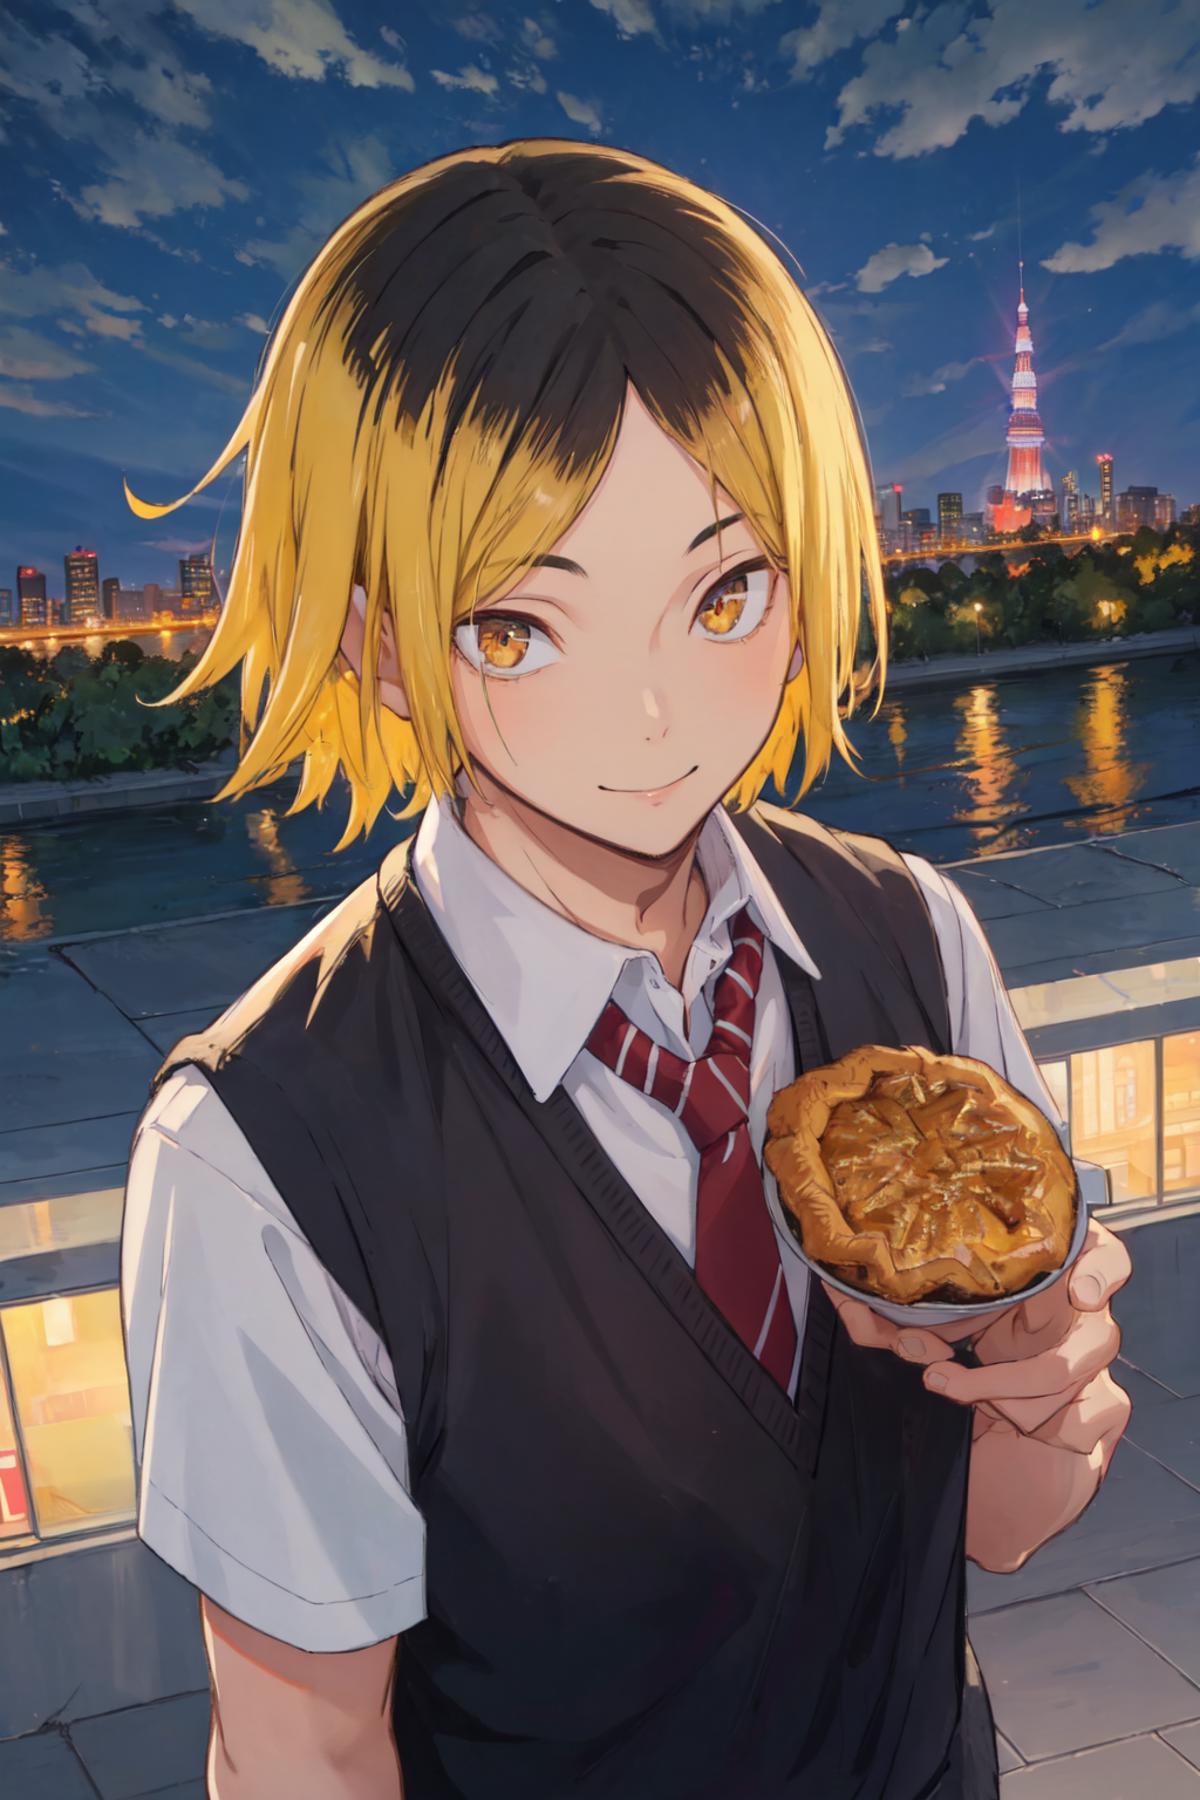 Kenma Kozume (Multiple Outfits, Anime-styled) image by SteamedHams